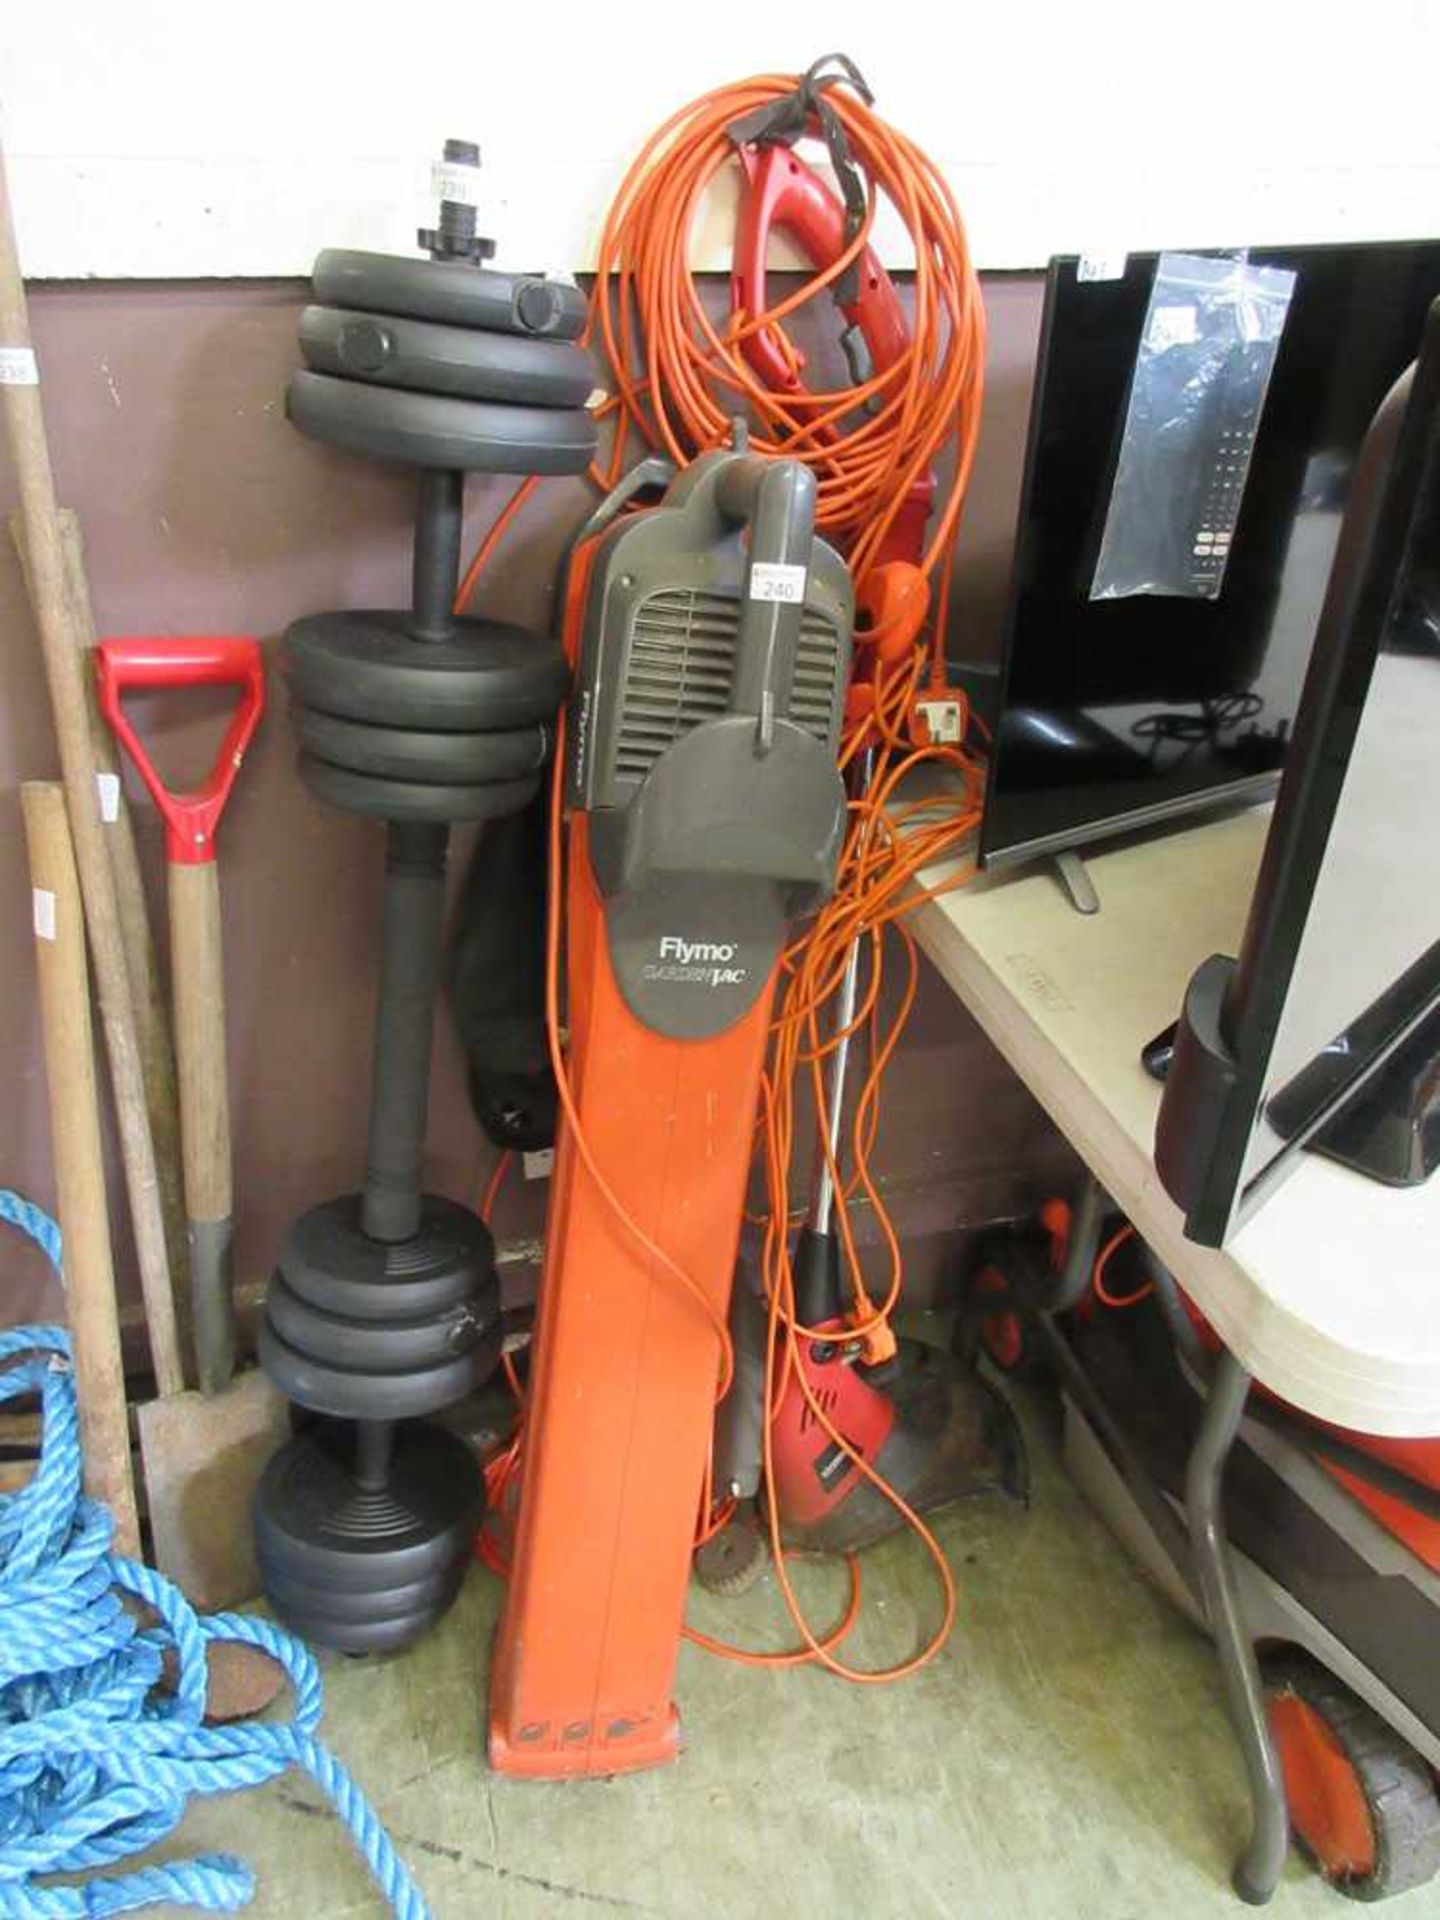 A Flymo garden vac together with two electric hedge trimmers